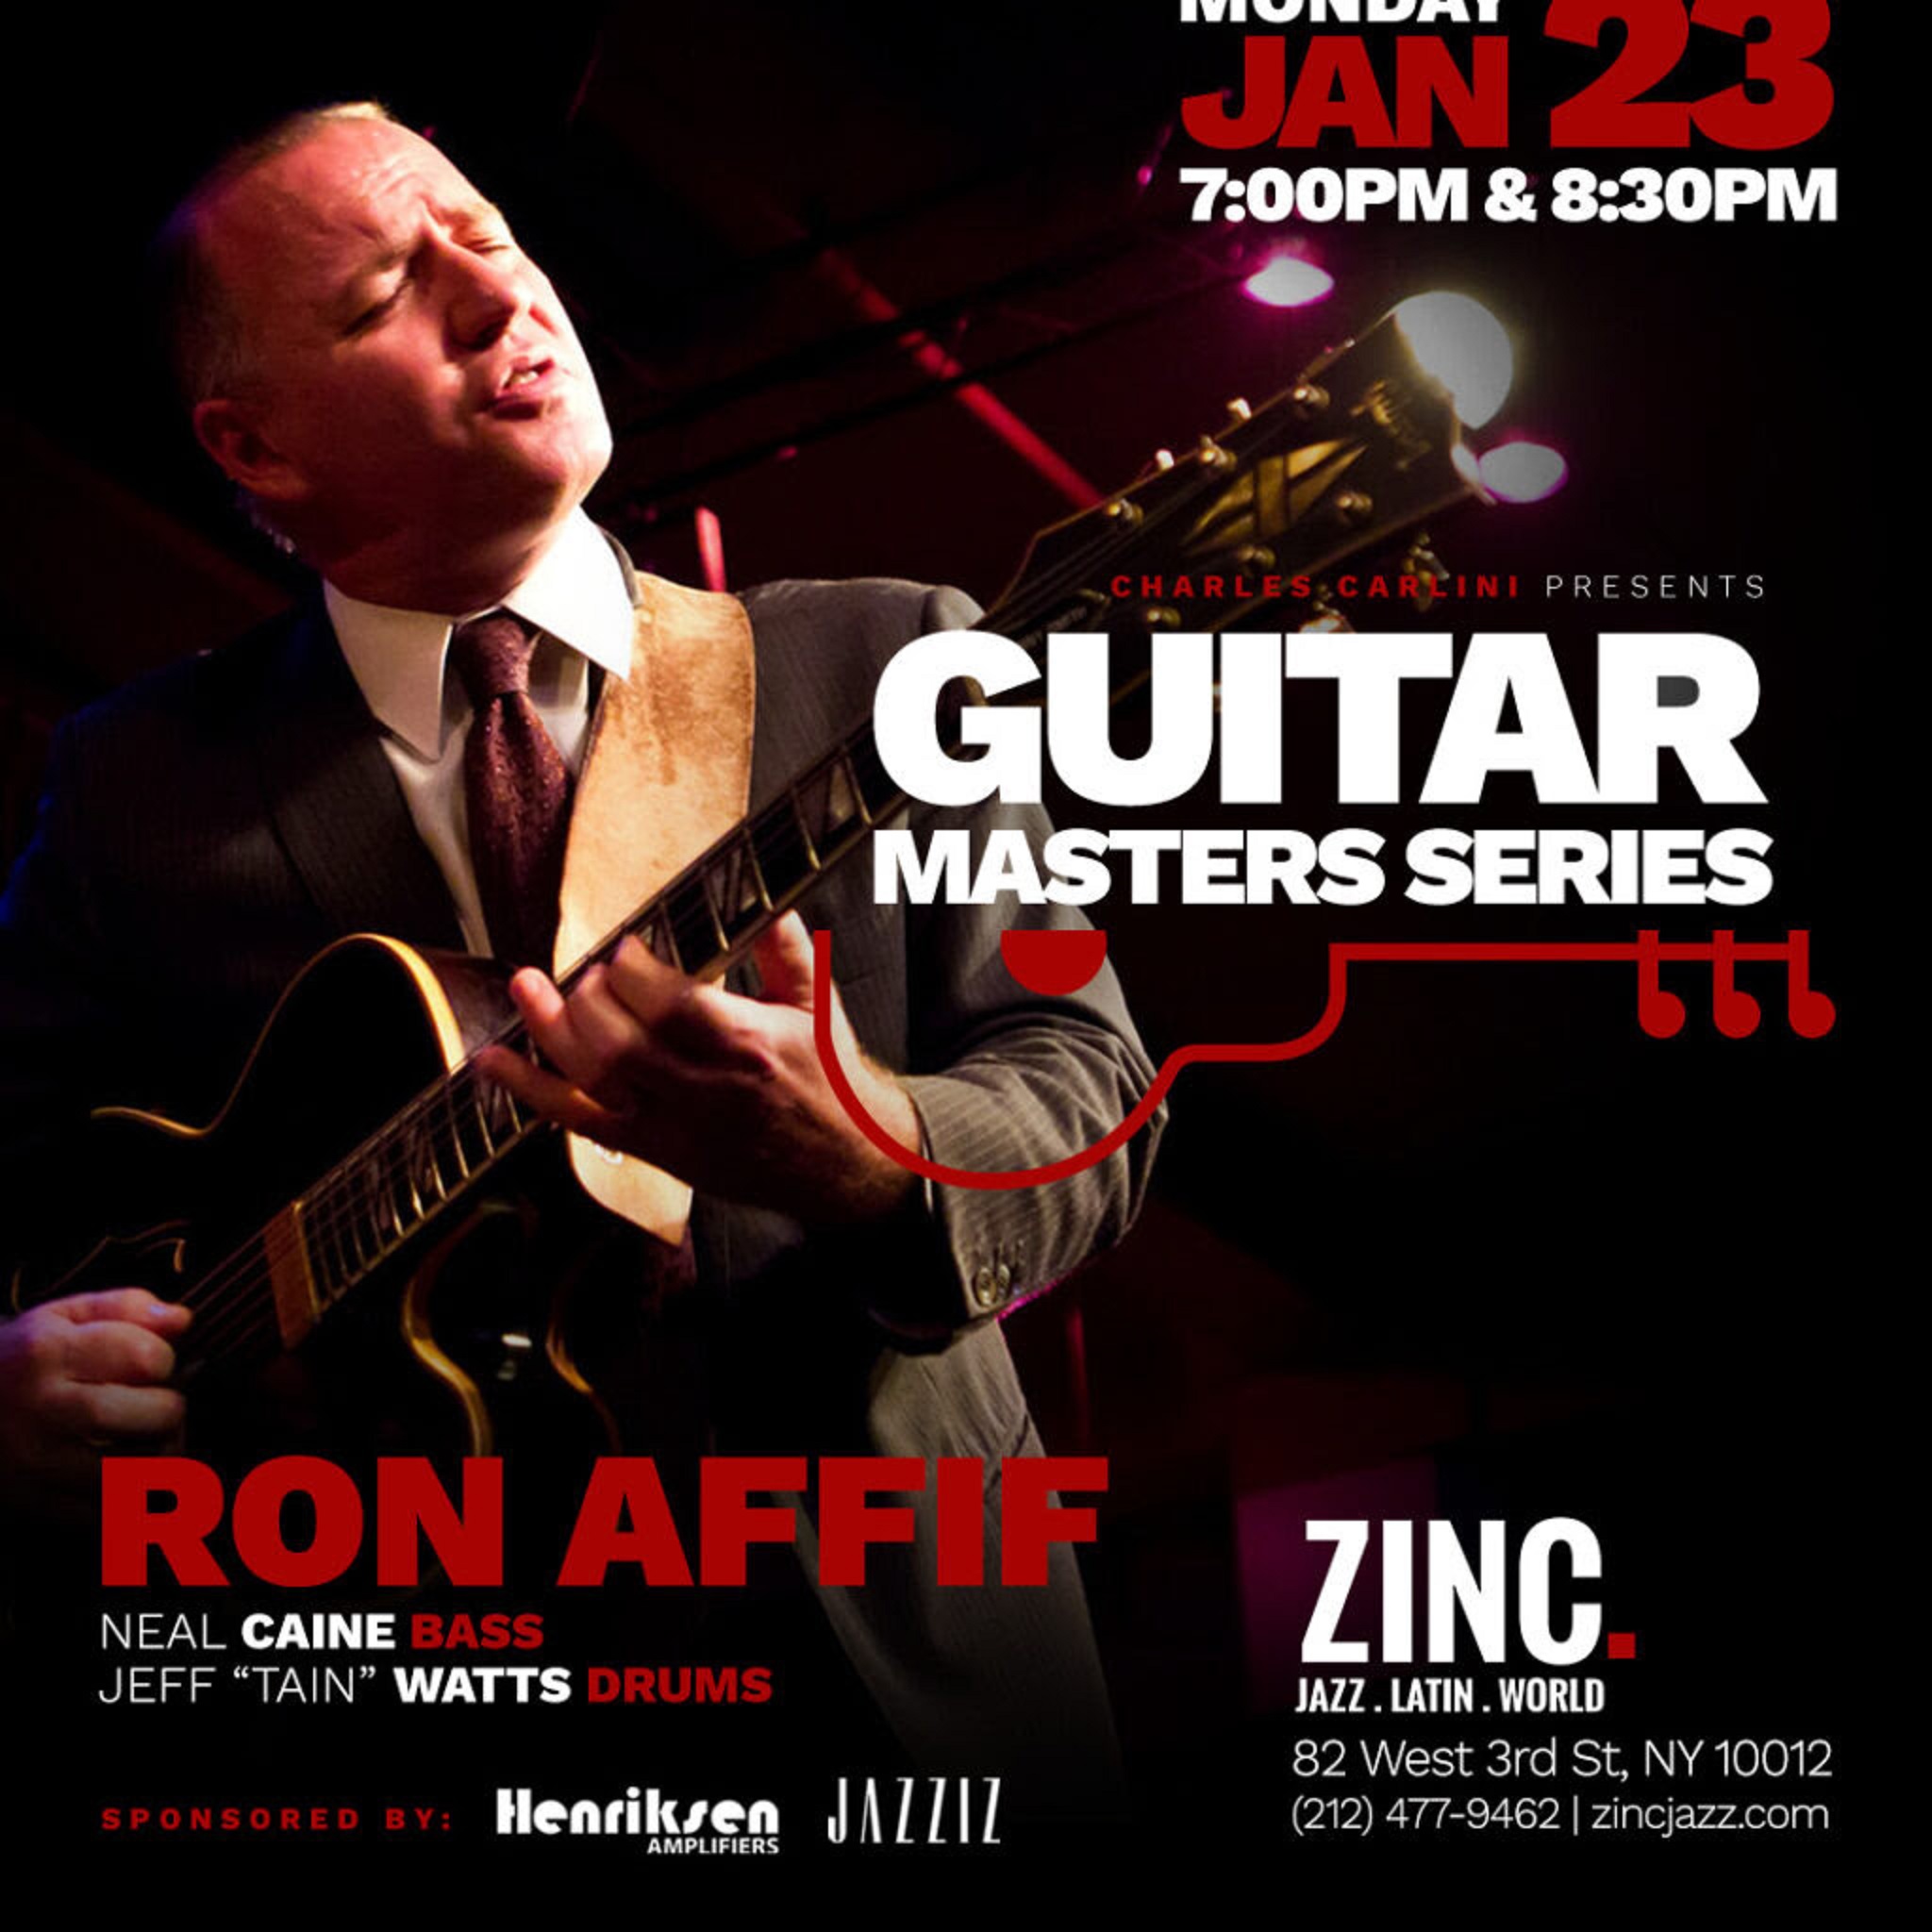 Guitarist Ron Affif hits the stage at Zinc on Monday, January 23